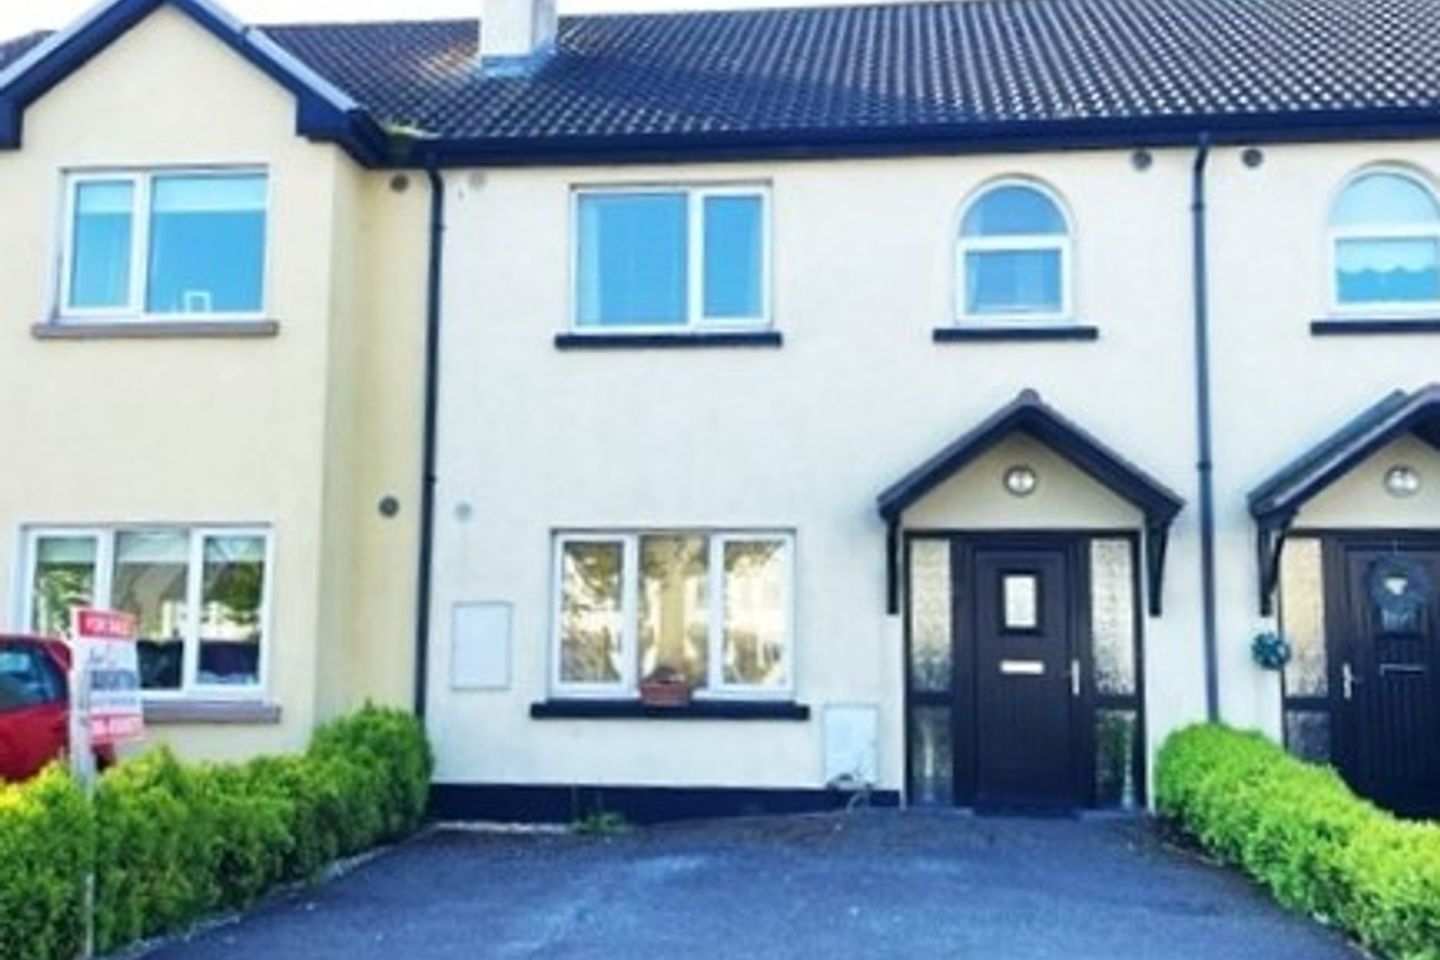 22 Fairlands, Roscommon Road, Athlone, Co. Westmeath